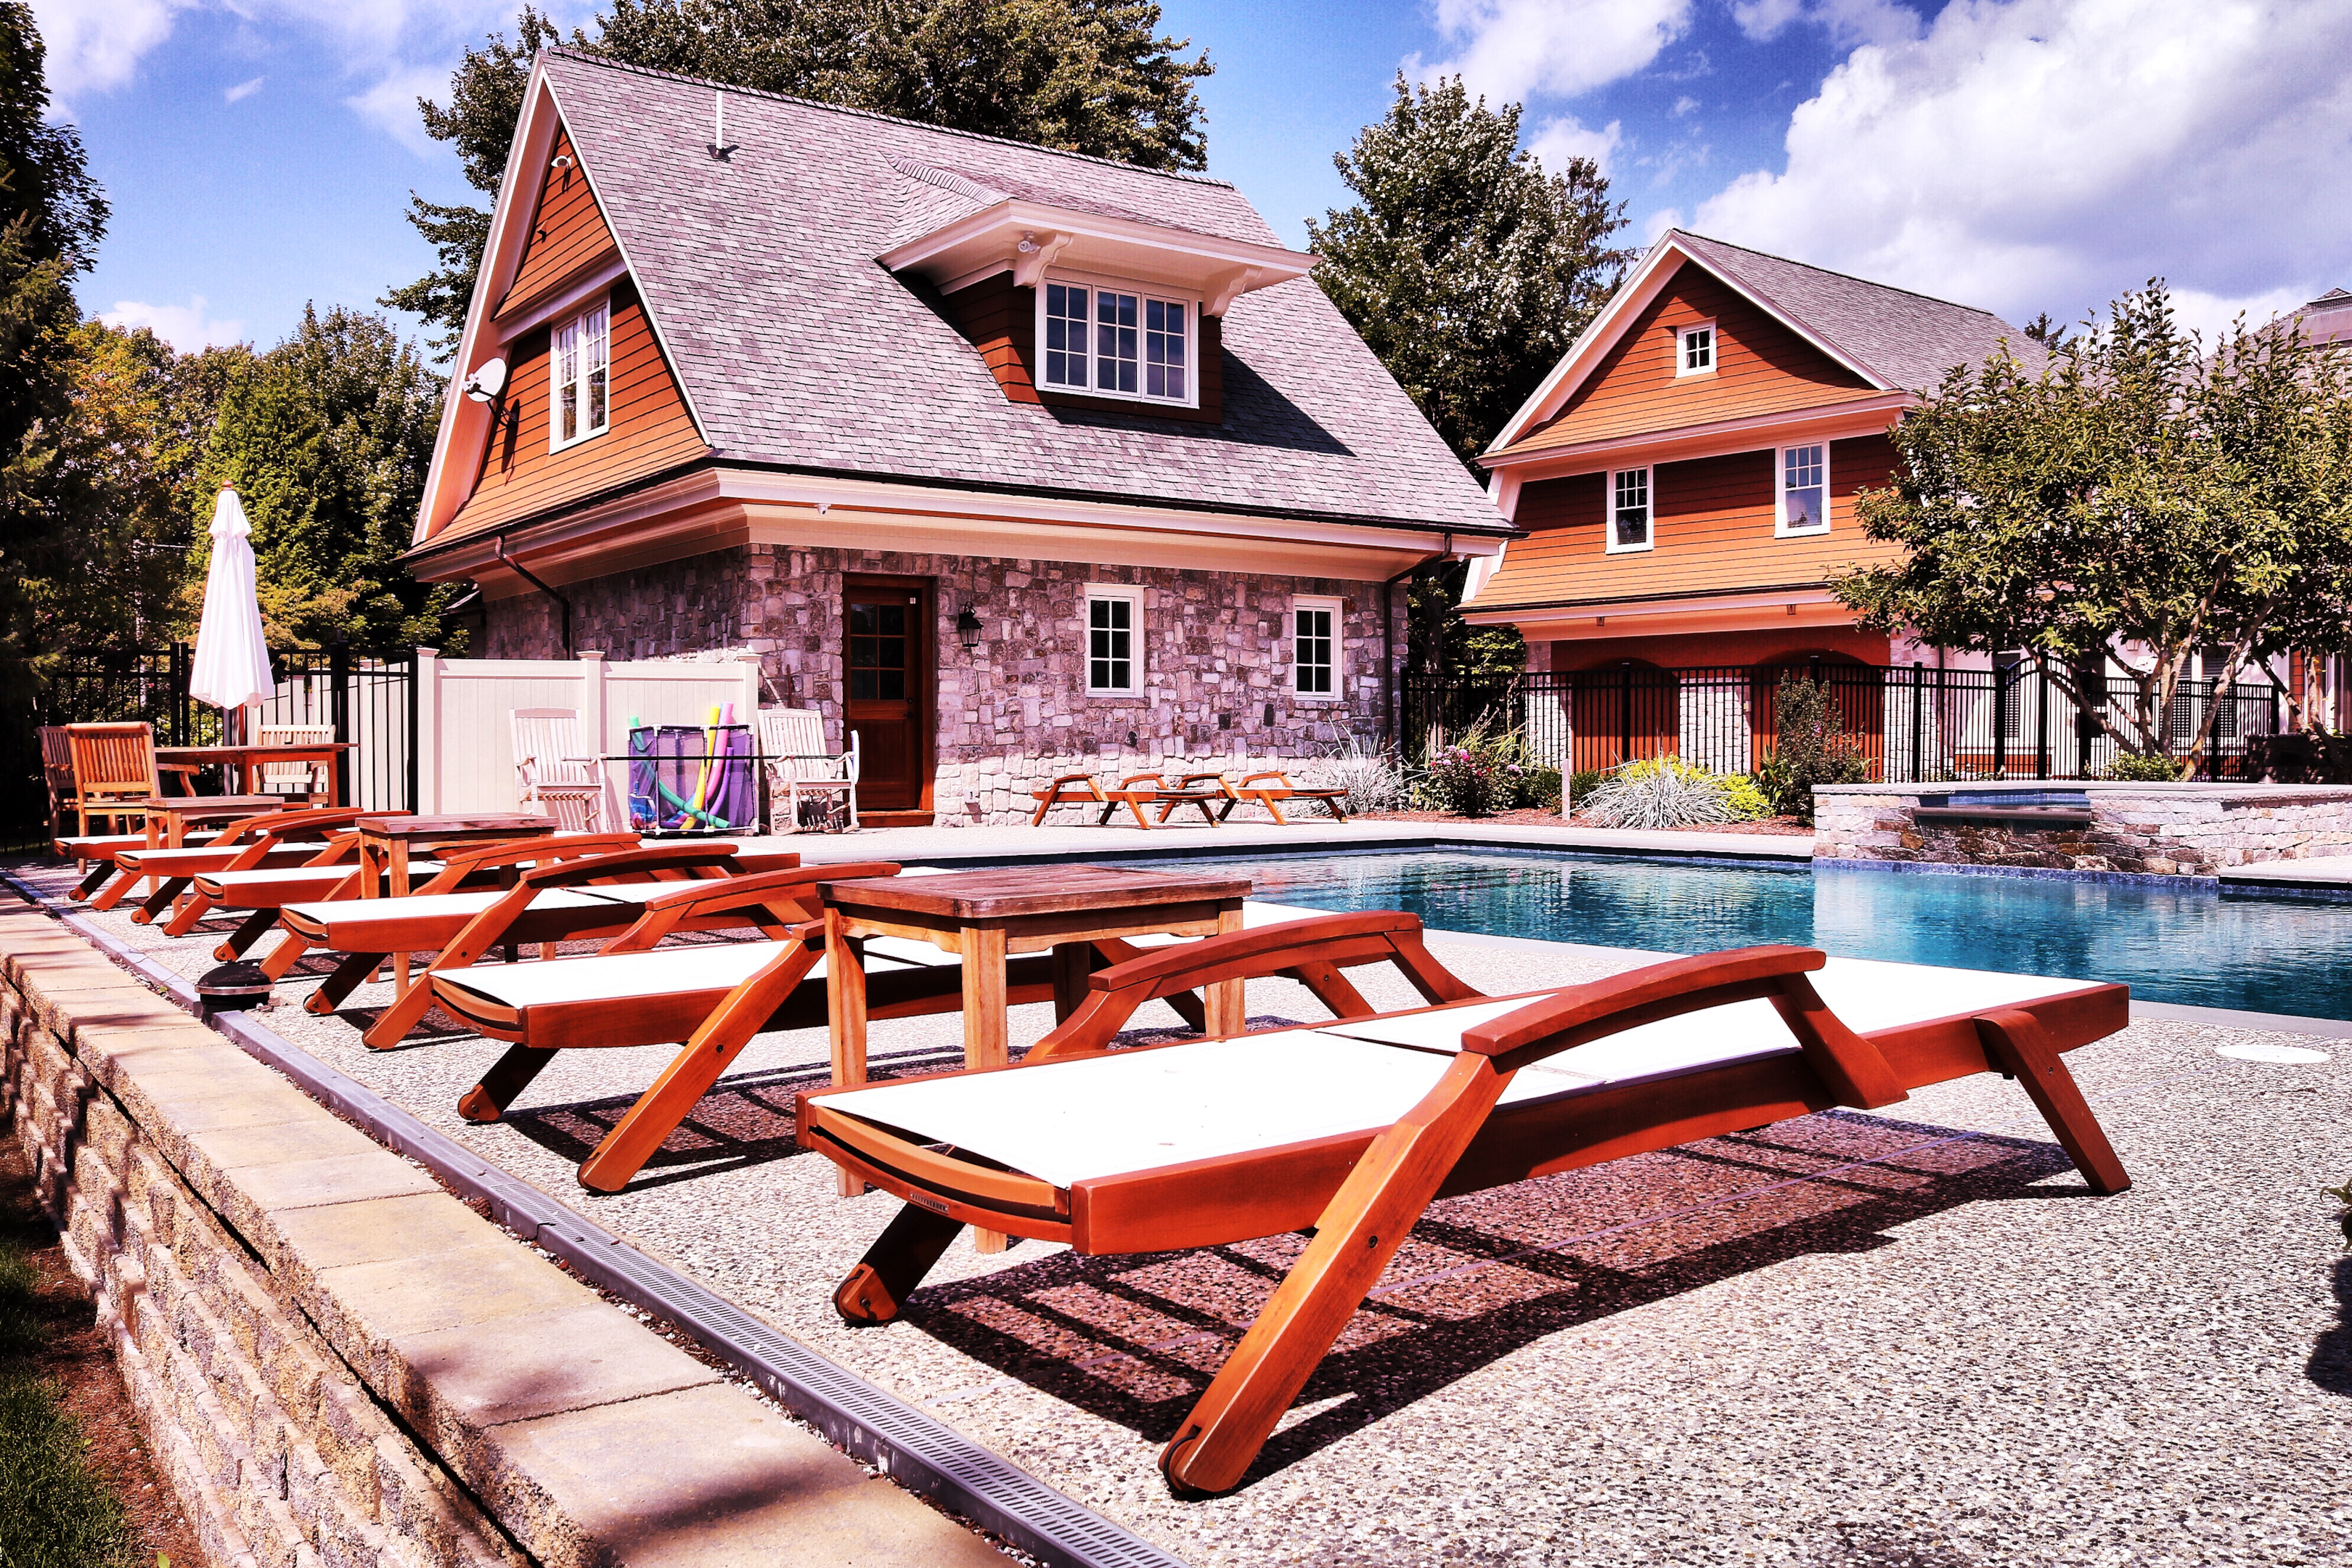 Outdoor swimming pool area with wooden lounge chairs and surrounding trees, next to a stone house and adjacent building under a partly cloudy sky.